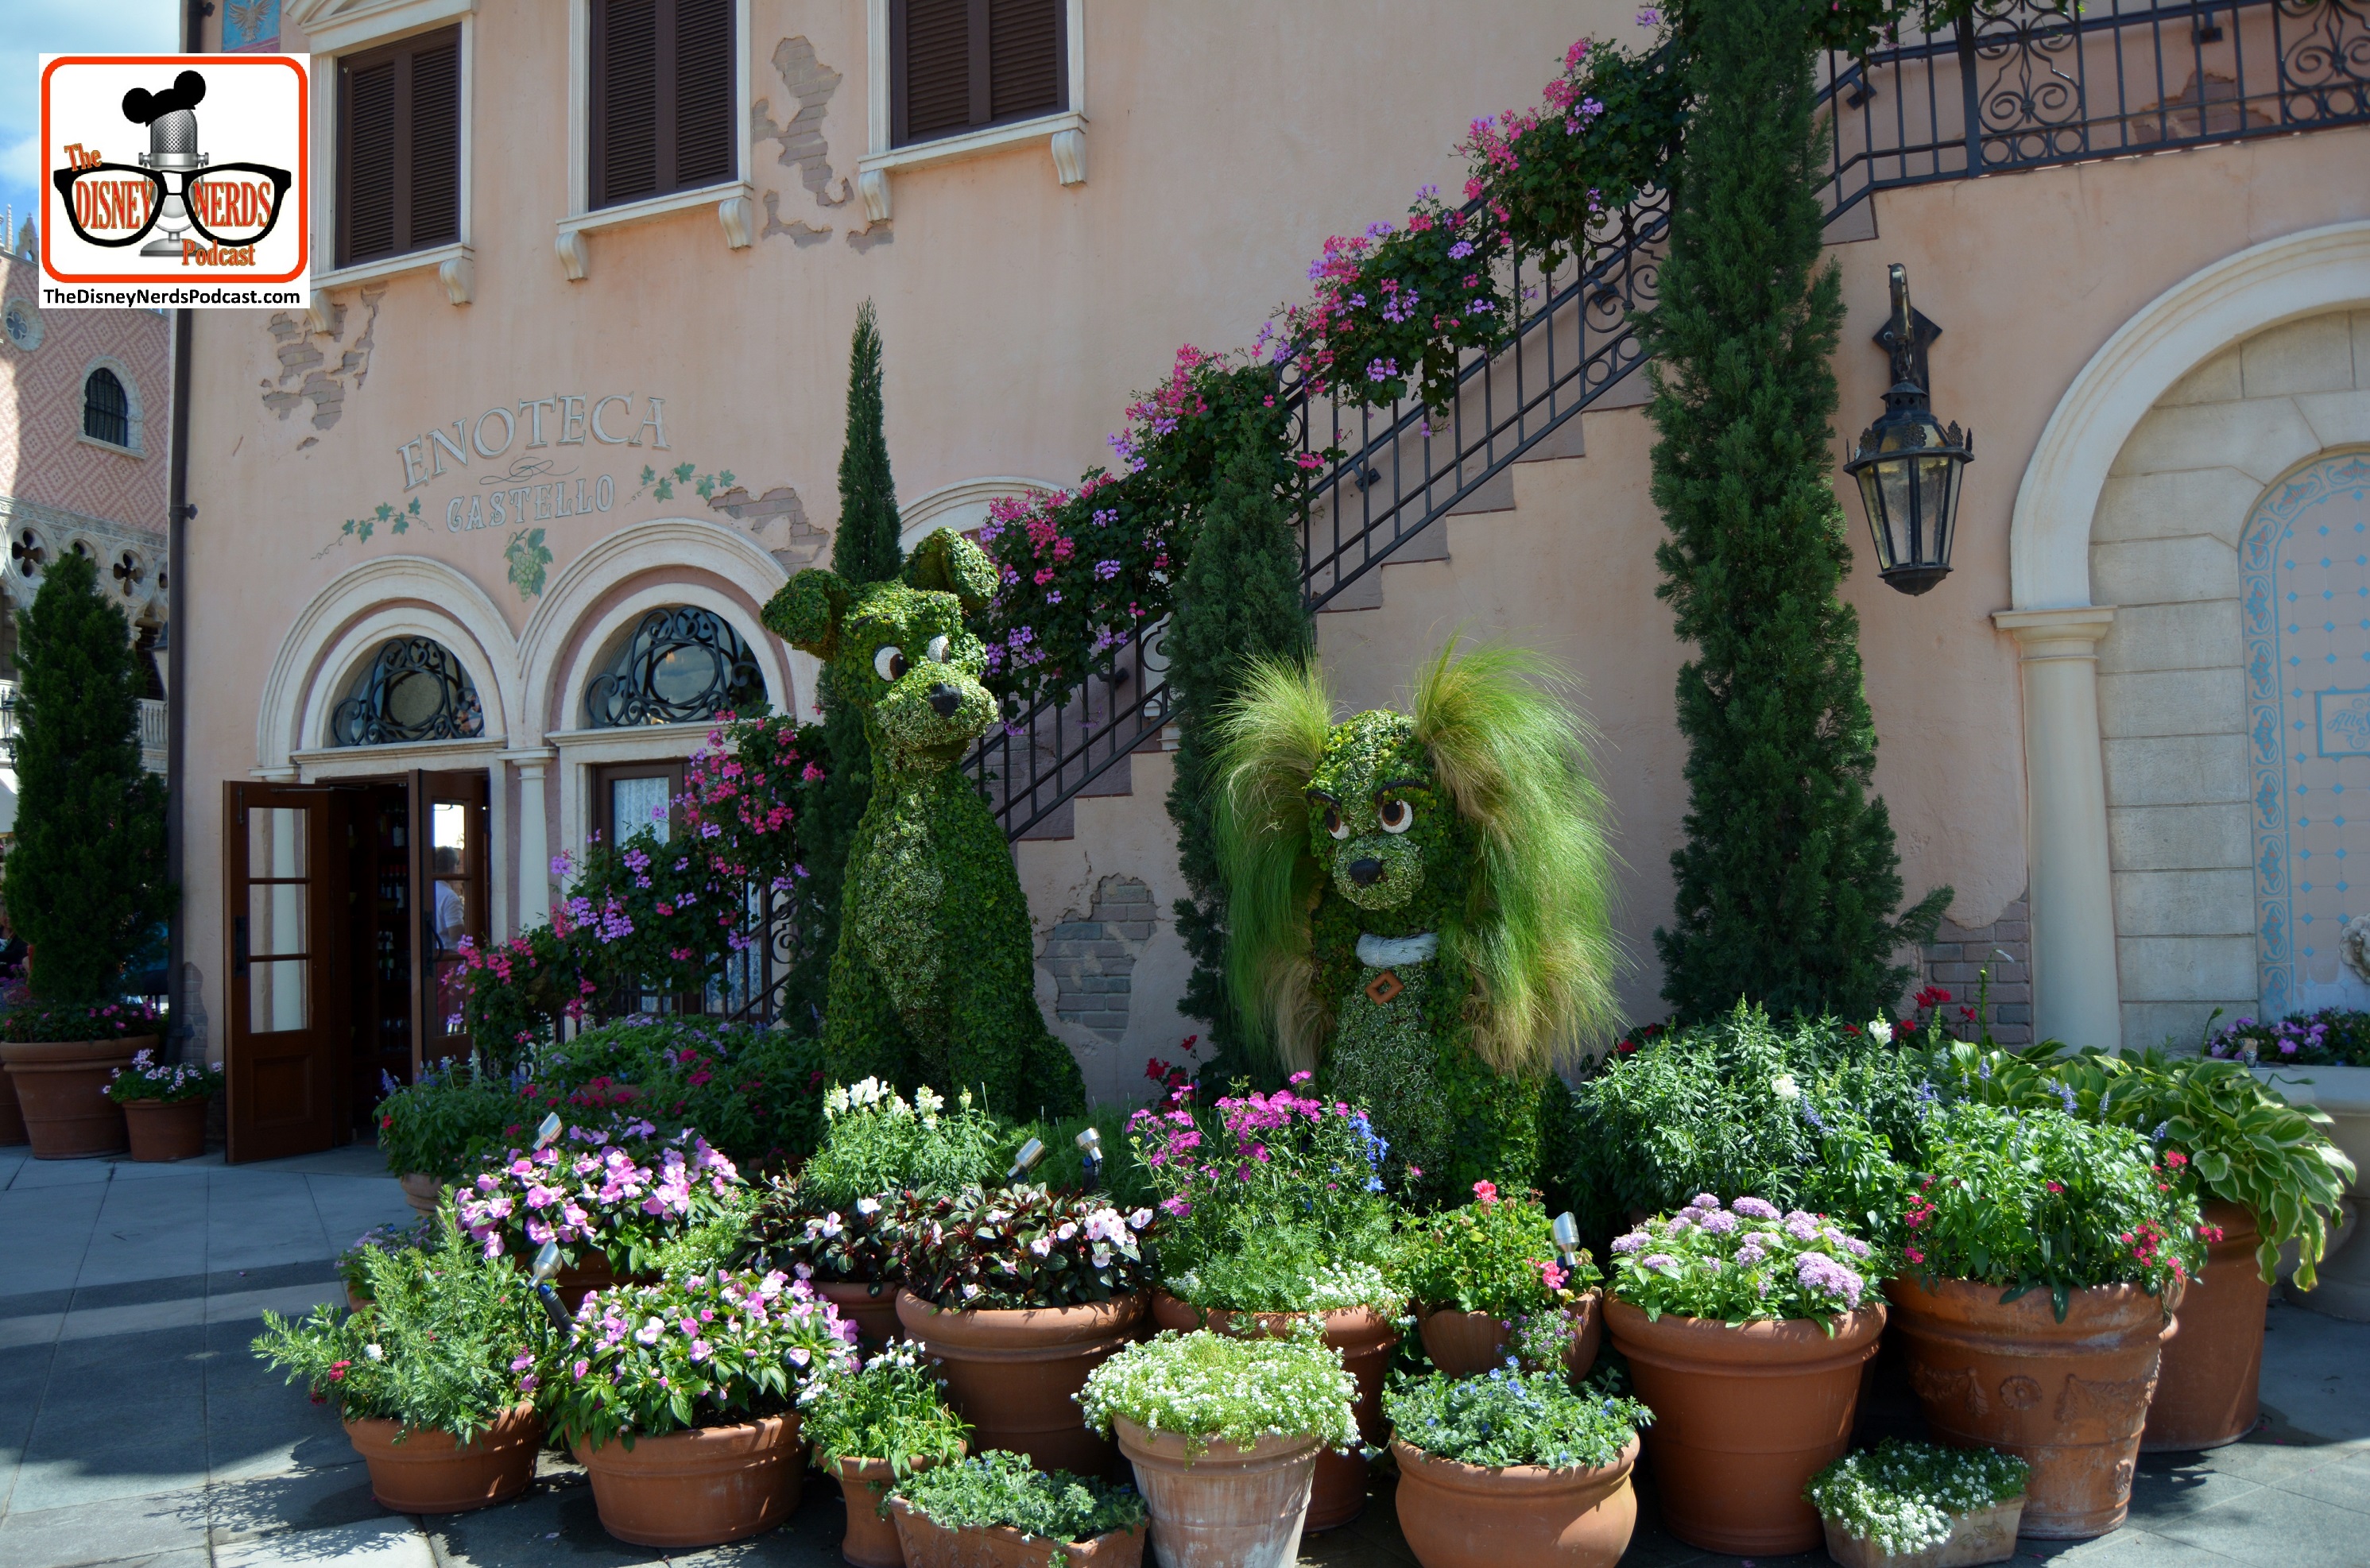 DNP April 2016 Photo Report: Epcot Flower and Garden Festival. Lady and the Tramp